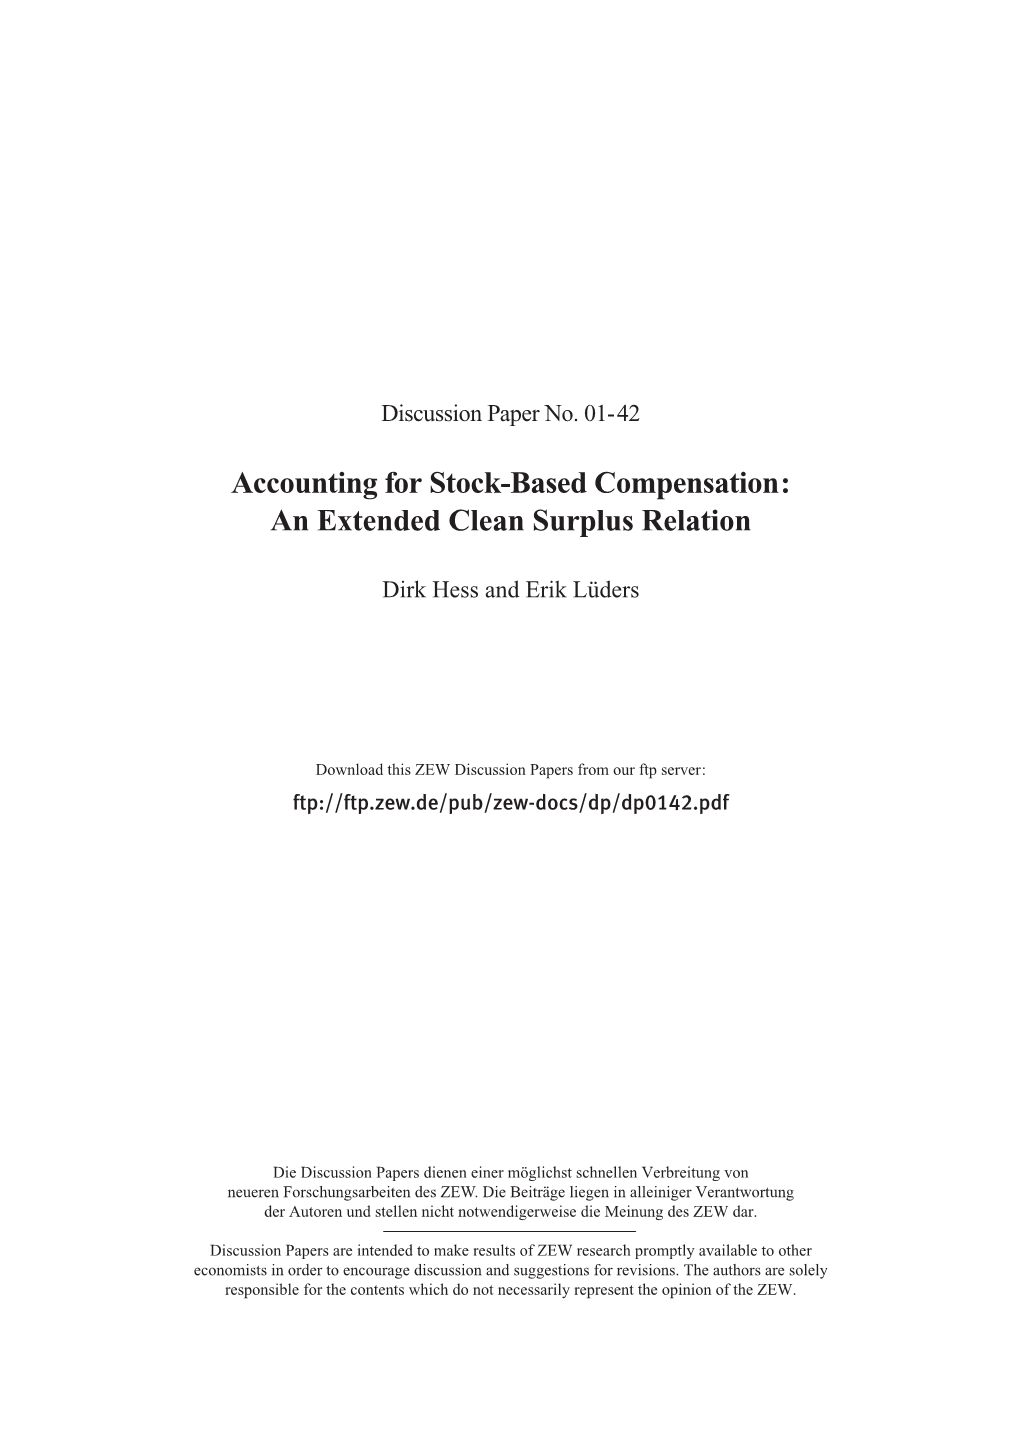 Accounting for Stock-Based Compensation: an Extended Clean Surplus Relation